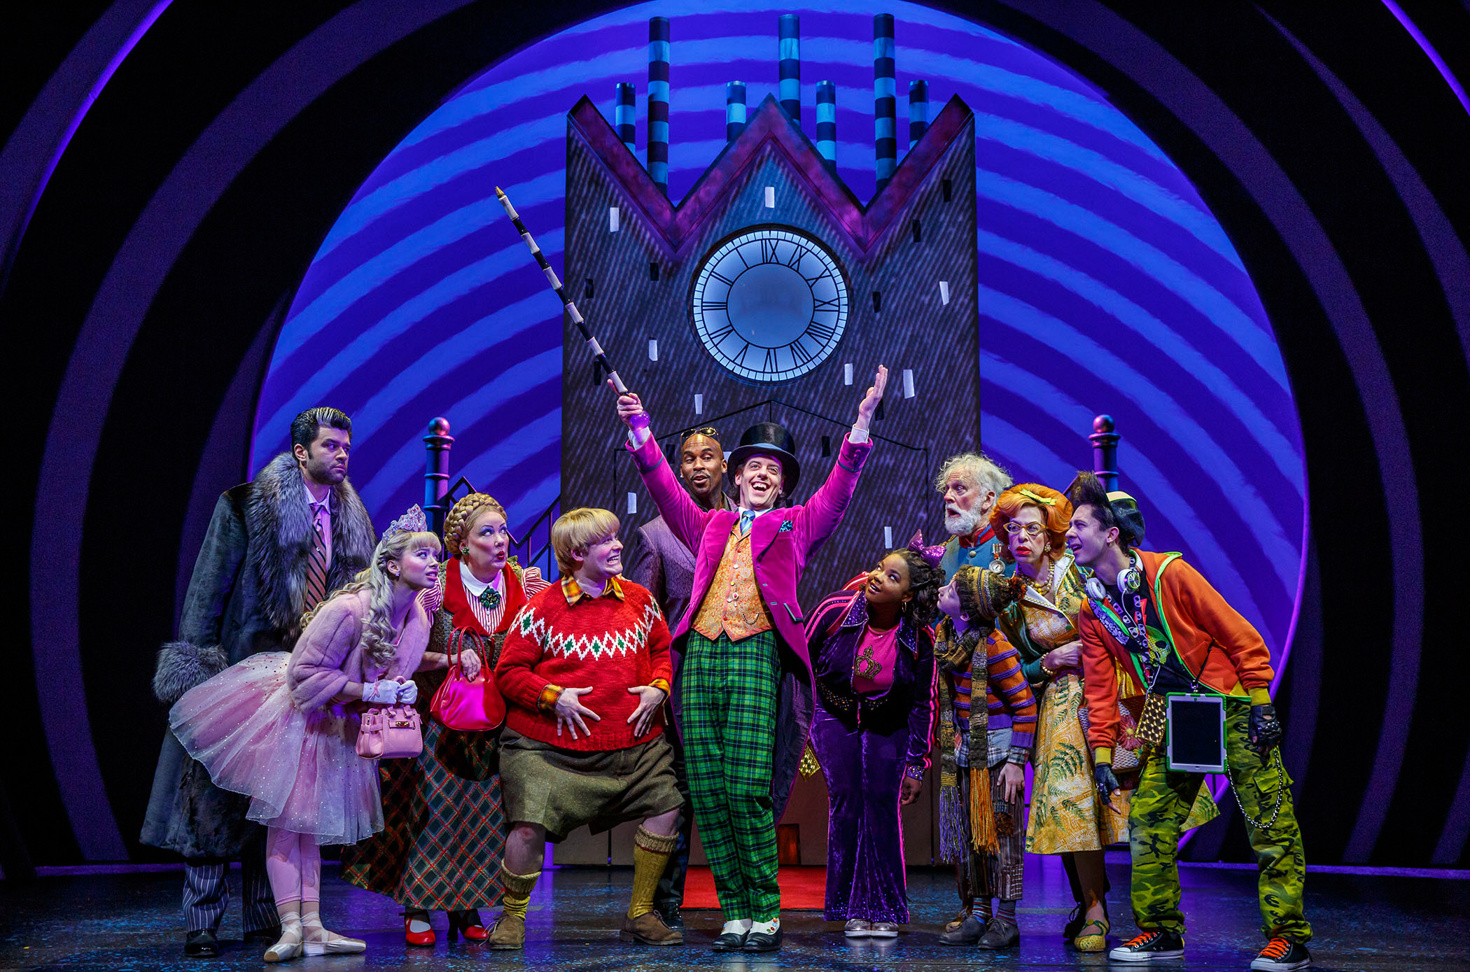 A musical version of Charlie and the Chocolate Factory is coming to Manchester next summer, The Manc